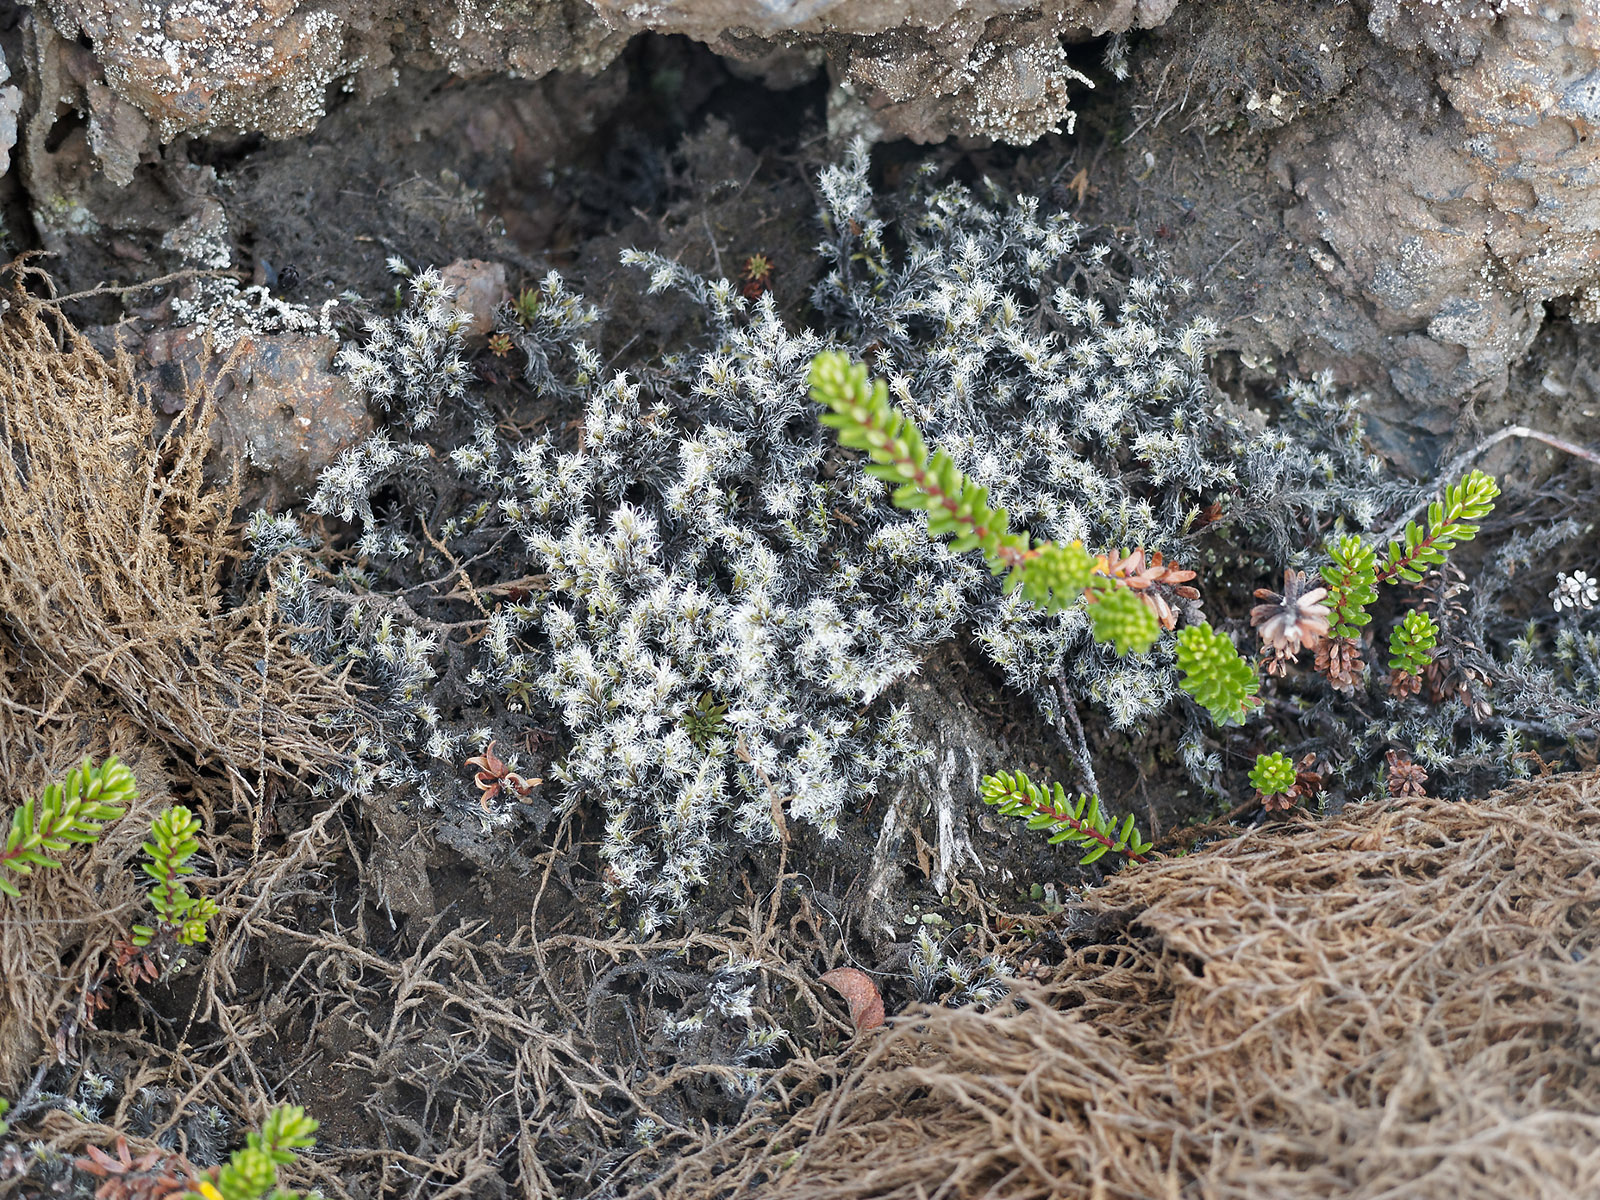 Detail of Woolly fringe moss which turns grey during drier climate.   The name of the fine admixed vascular plant is unknown.